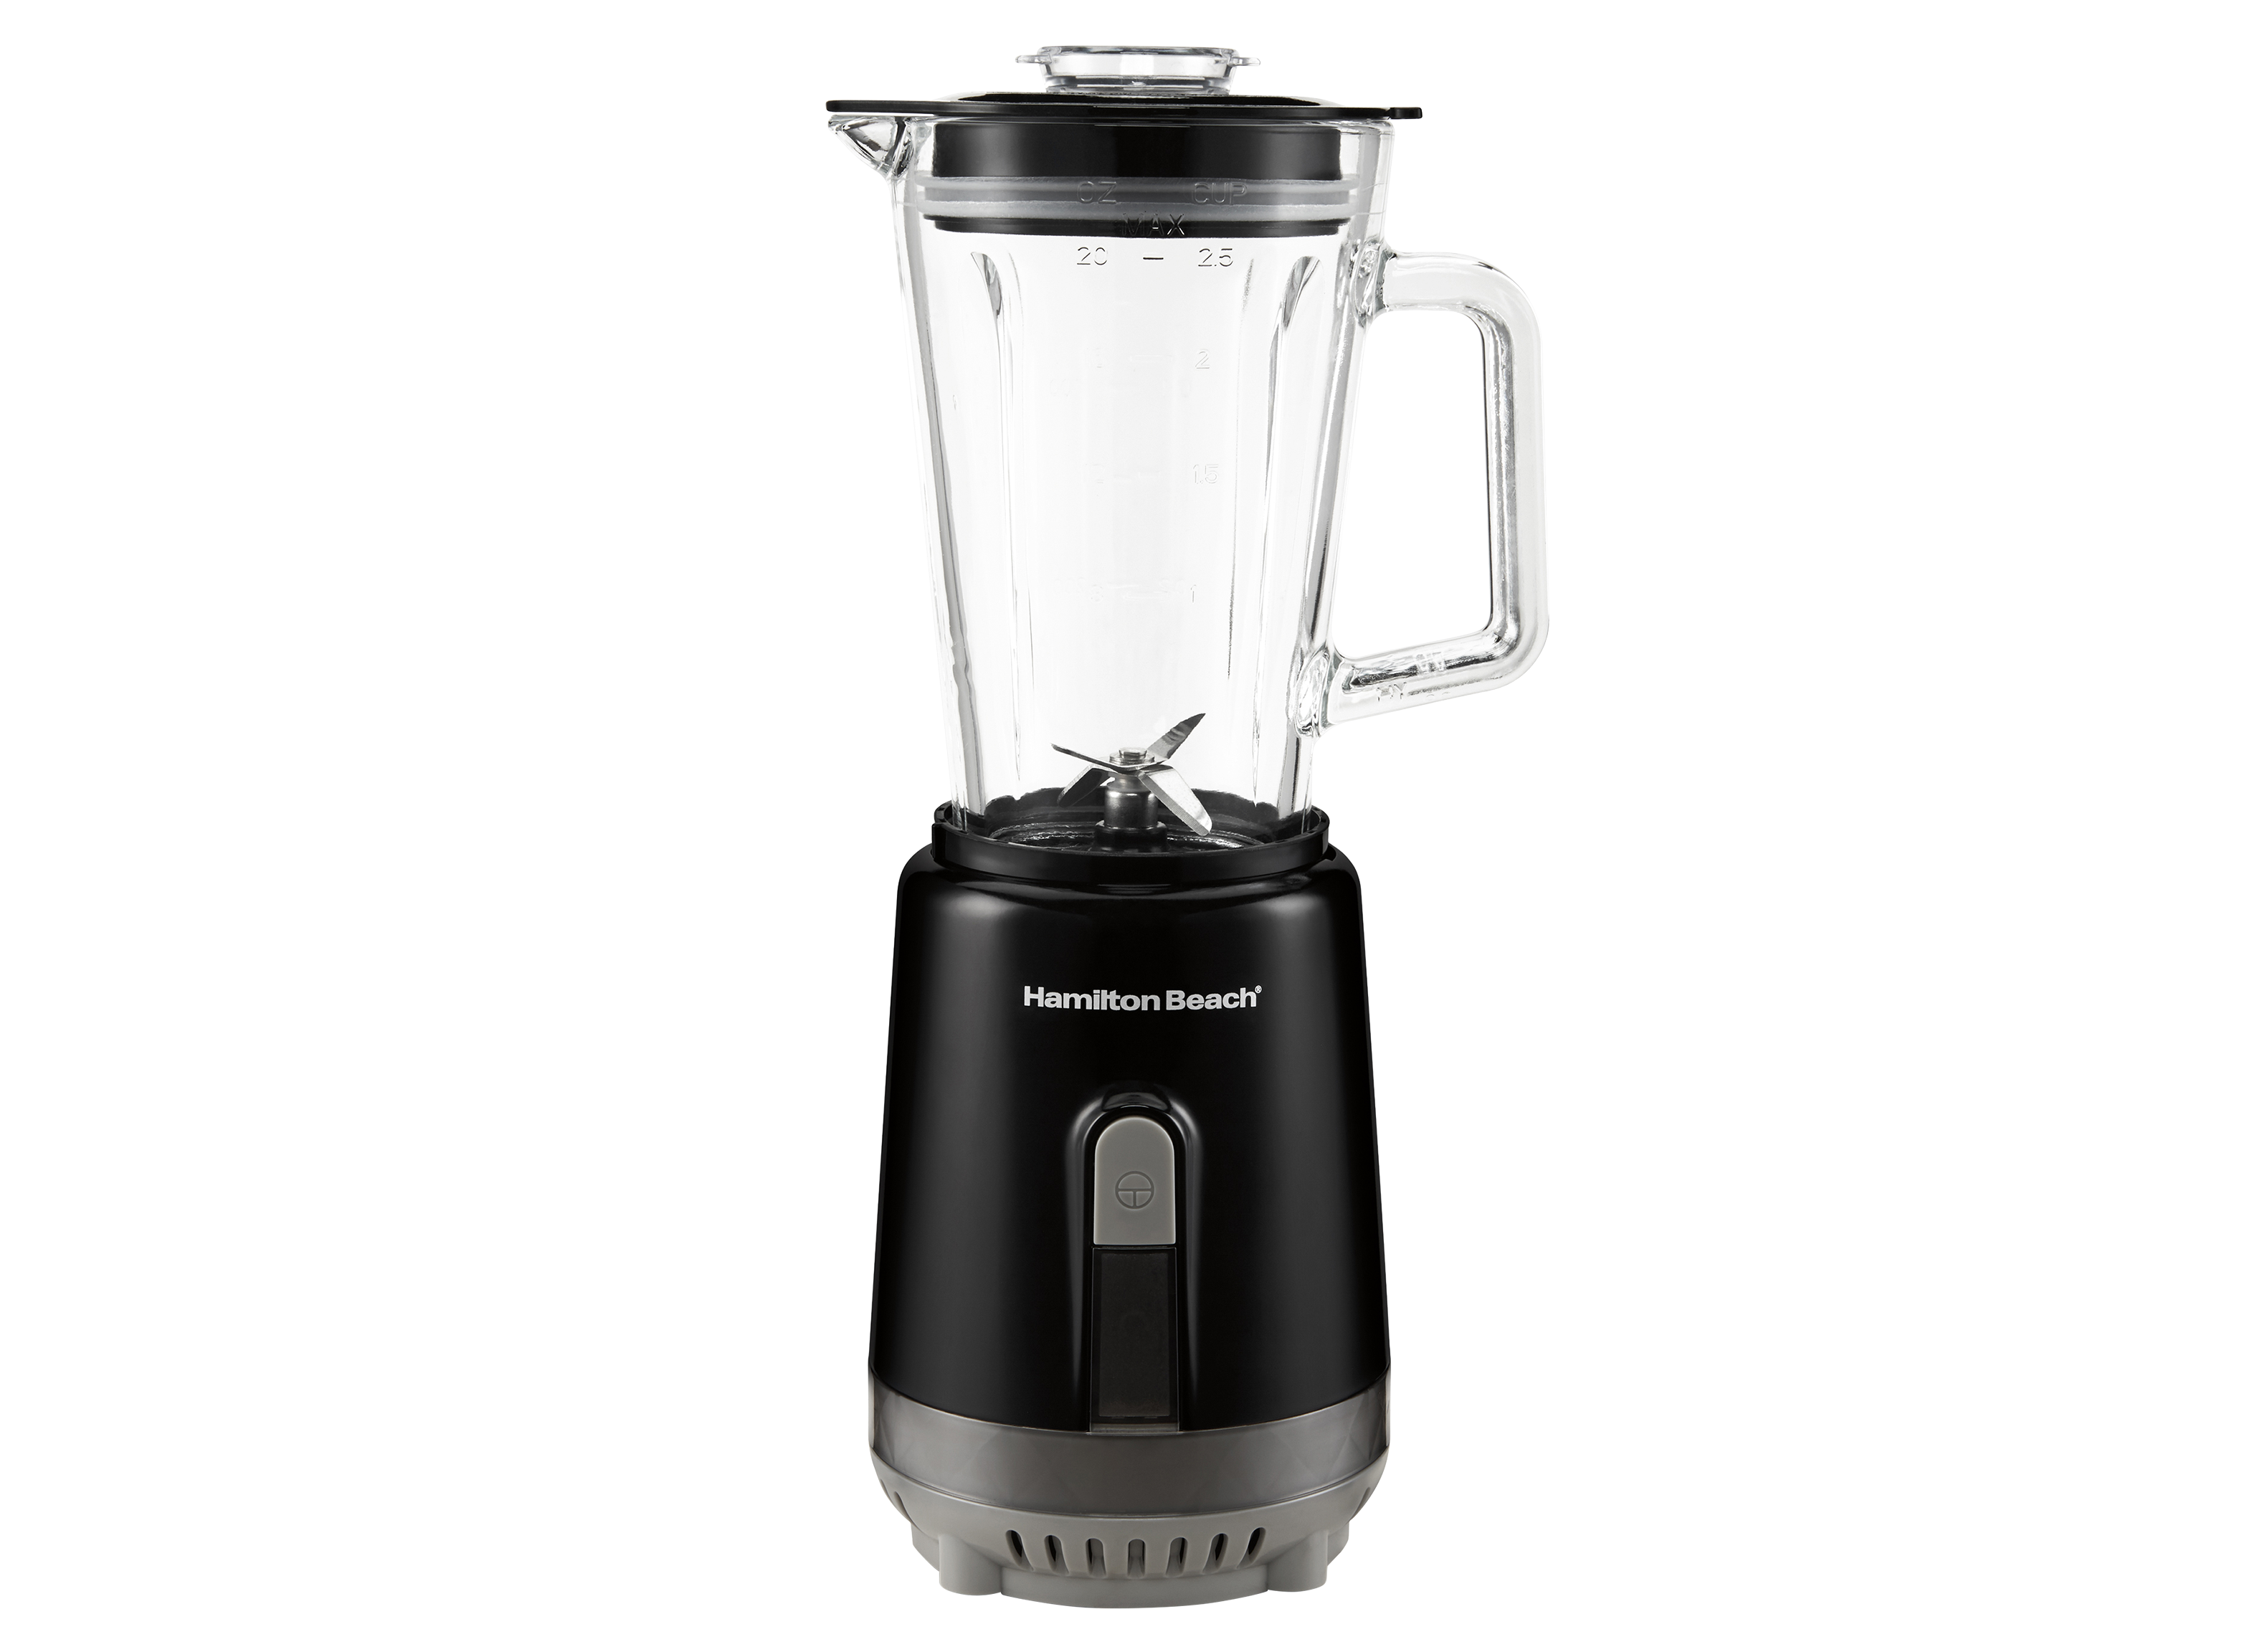 https://crdms.images.consumerreports.org/prod/products/cr/models/404964-personal-blenders-hamilton-beach-51157-10023839.png